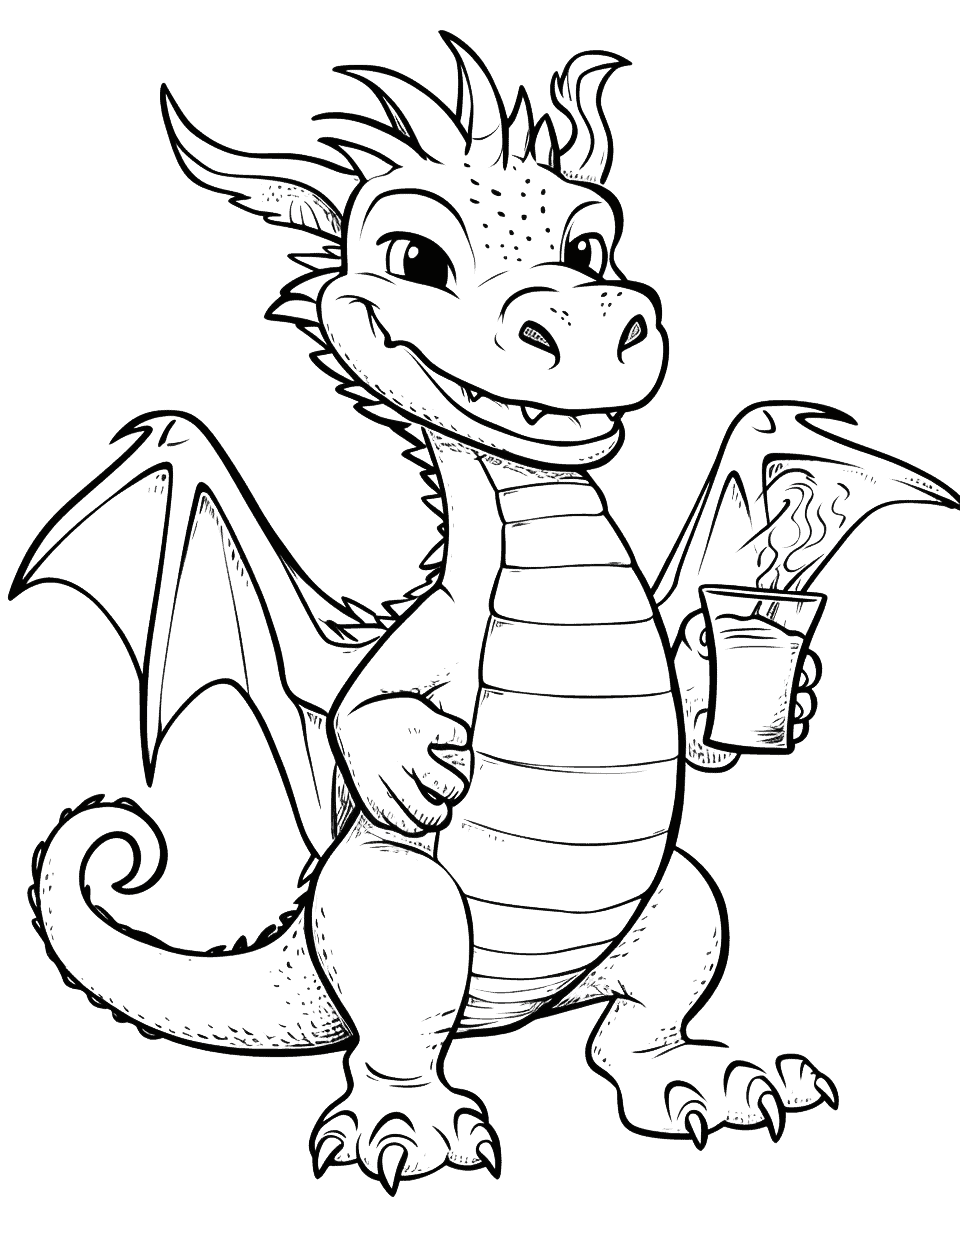 Cool Dragon Coloring Page - A cool dragon with a laid-back attitude and sipping a drink.